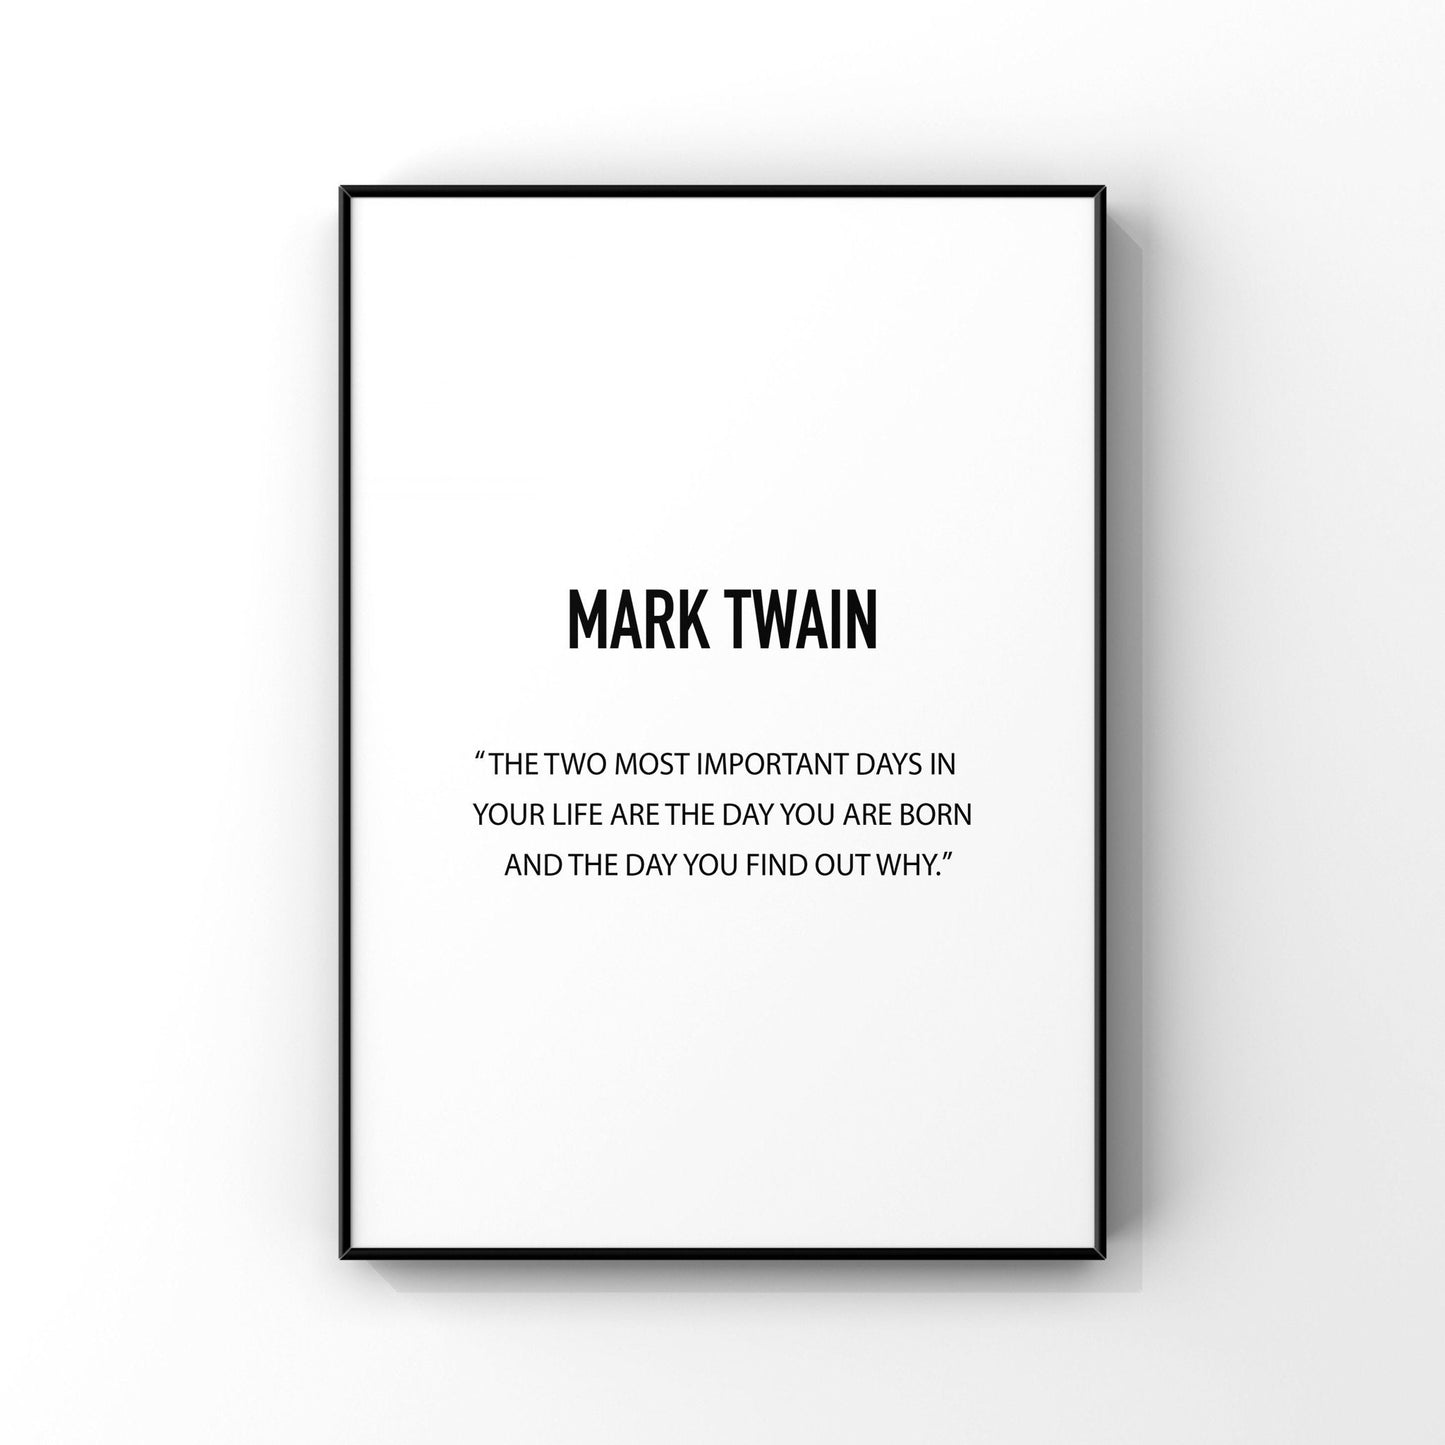 The two most important days in your life,Mark Twain quote,Mark Twain print,Inspirational print,Motivational quote,Inspirational wall decor